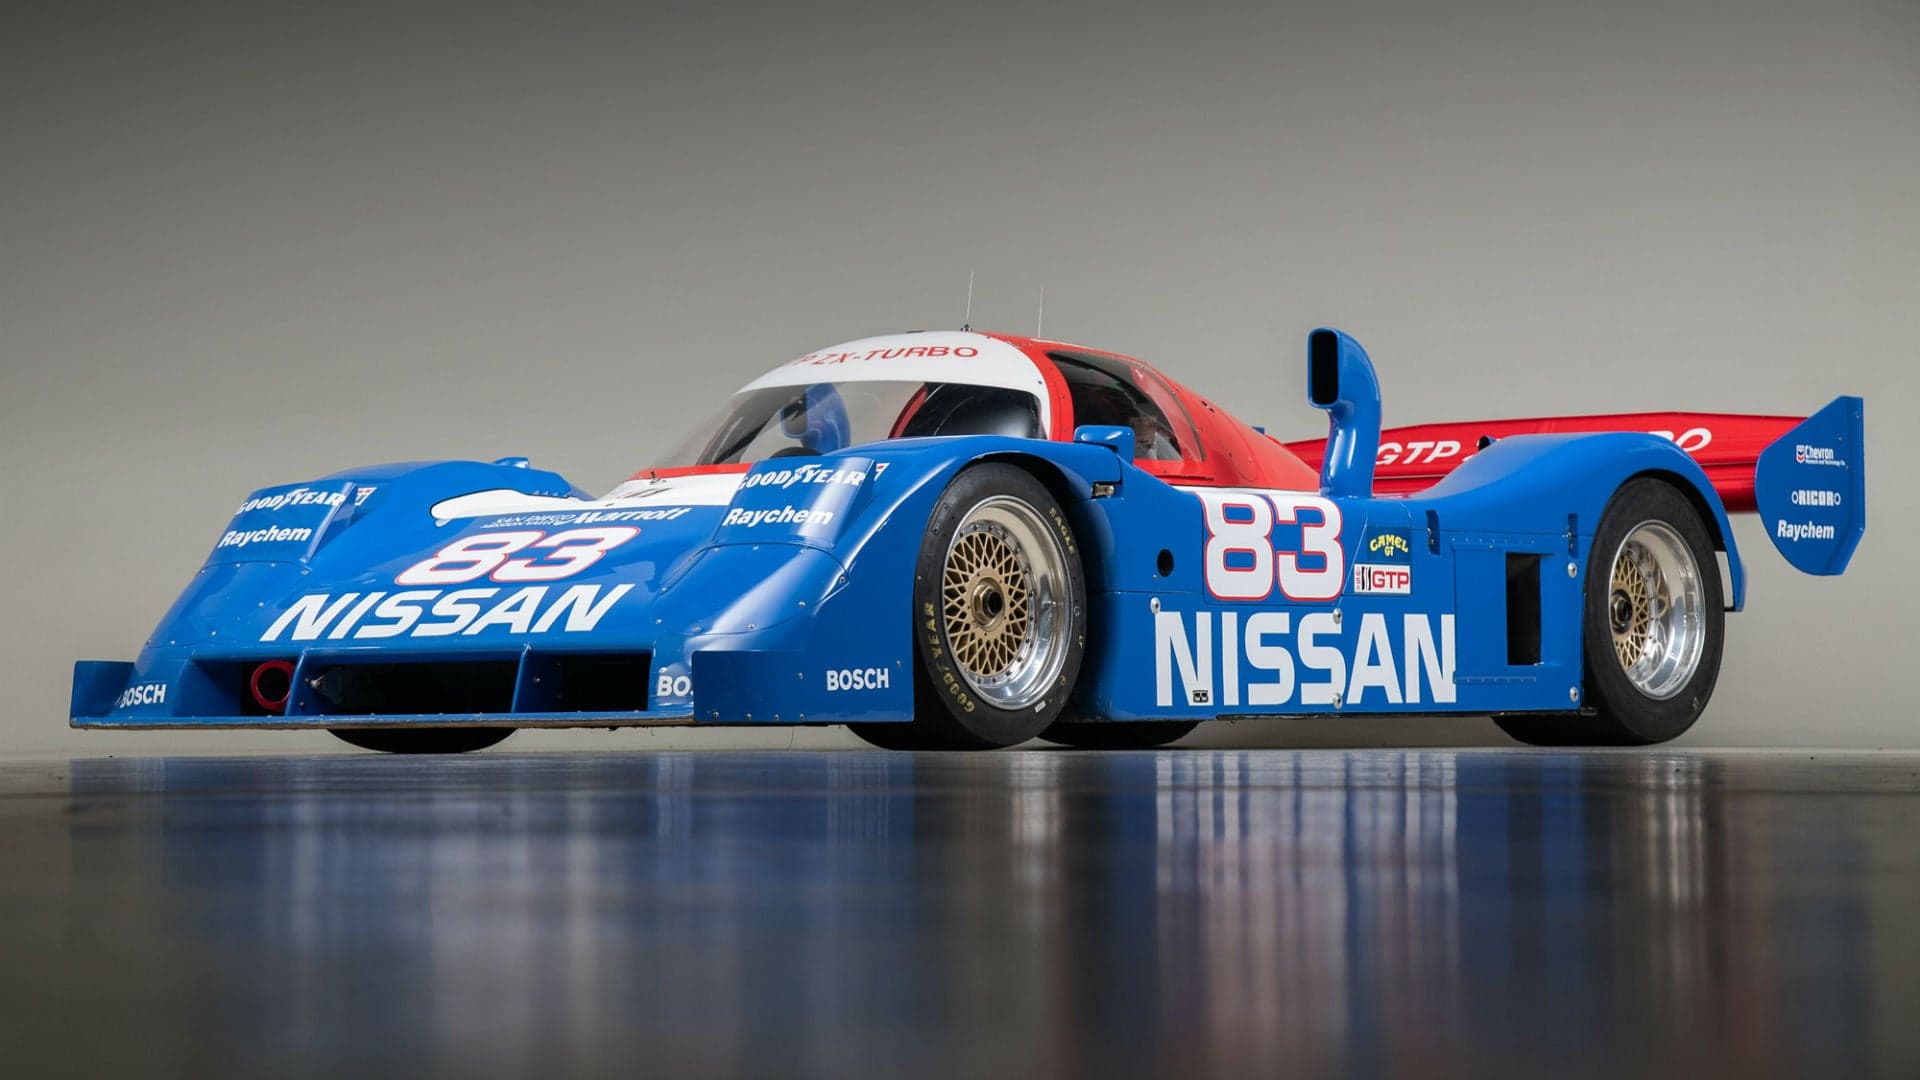 This Pristine 1990 Nissan NPT-90 Prototype Racer Can Be Yours for an Undisclosed Amount